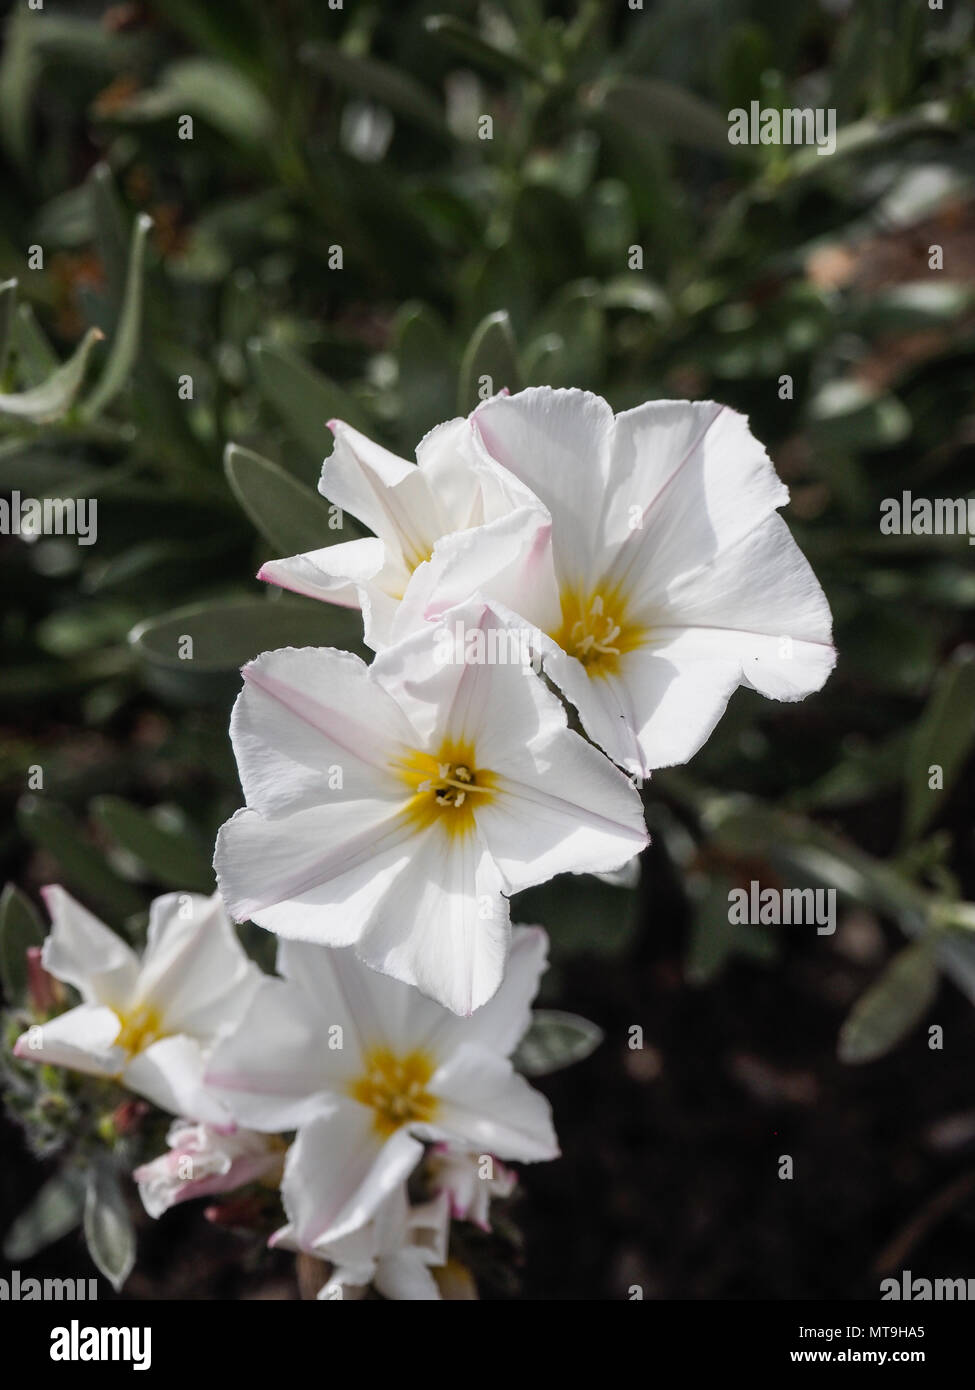 A close up of the white flowers of Convolvulus cneorum Stock Photo